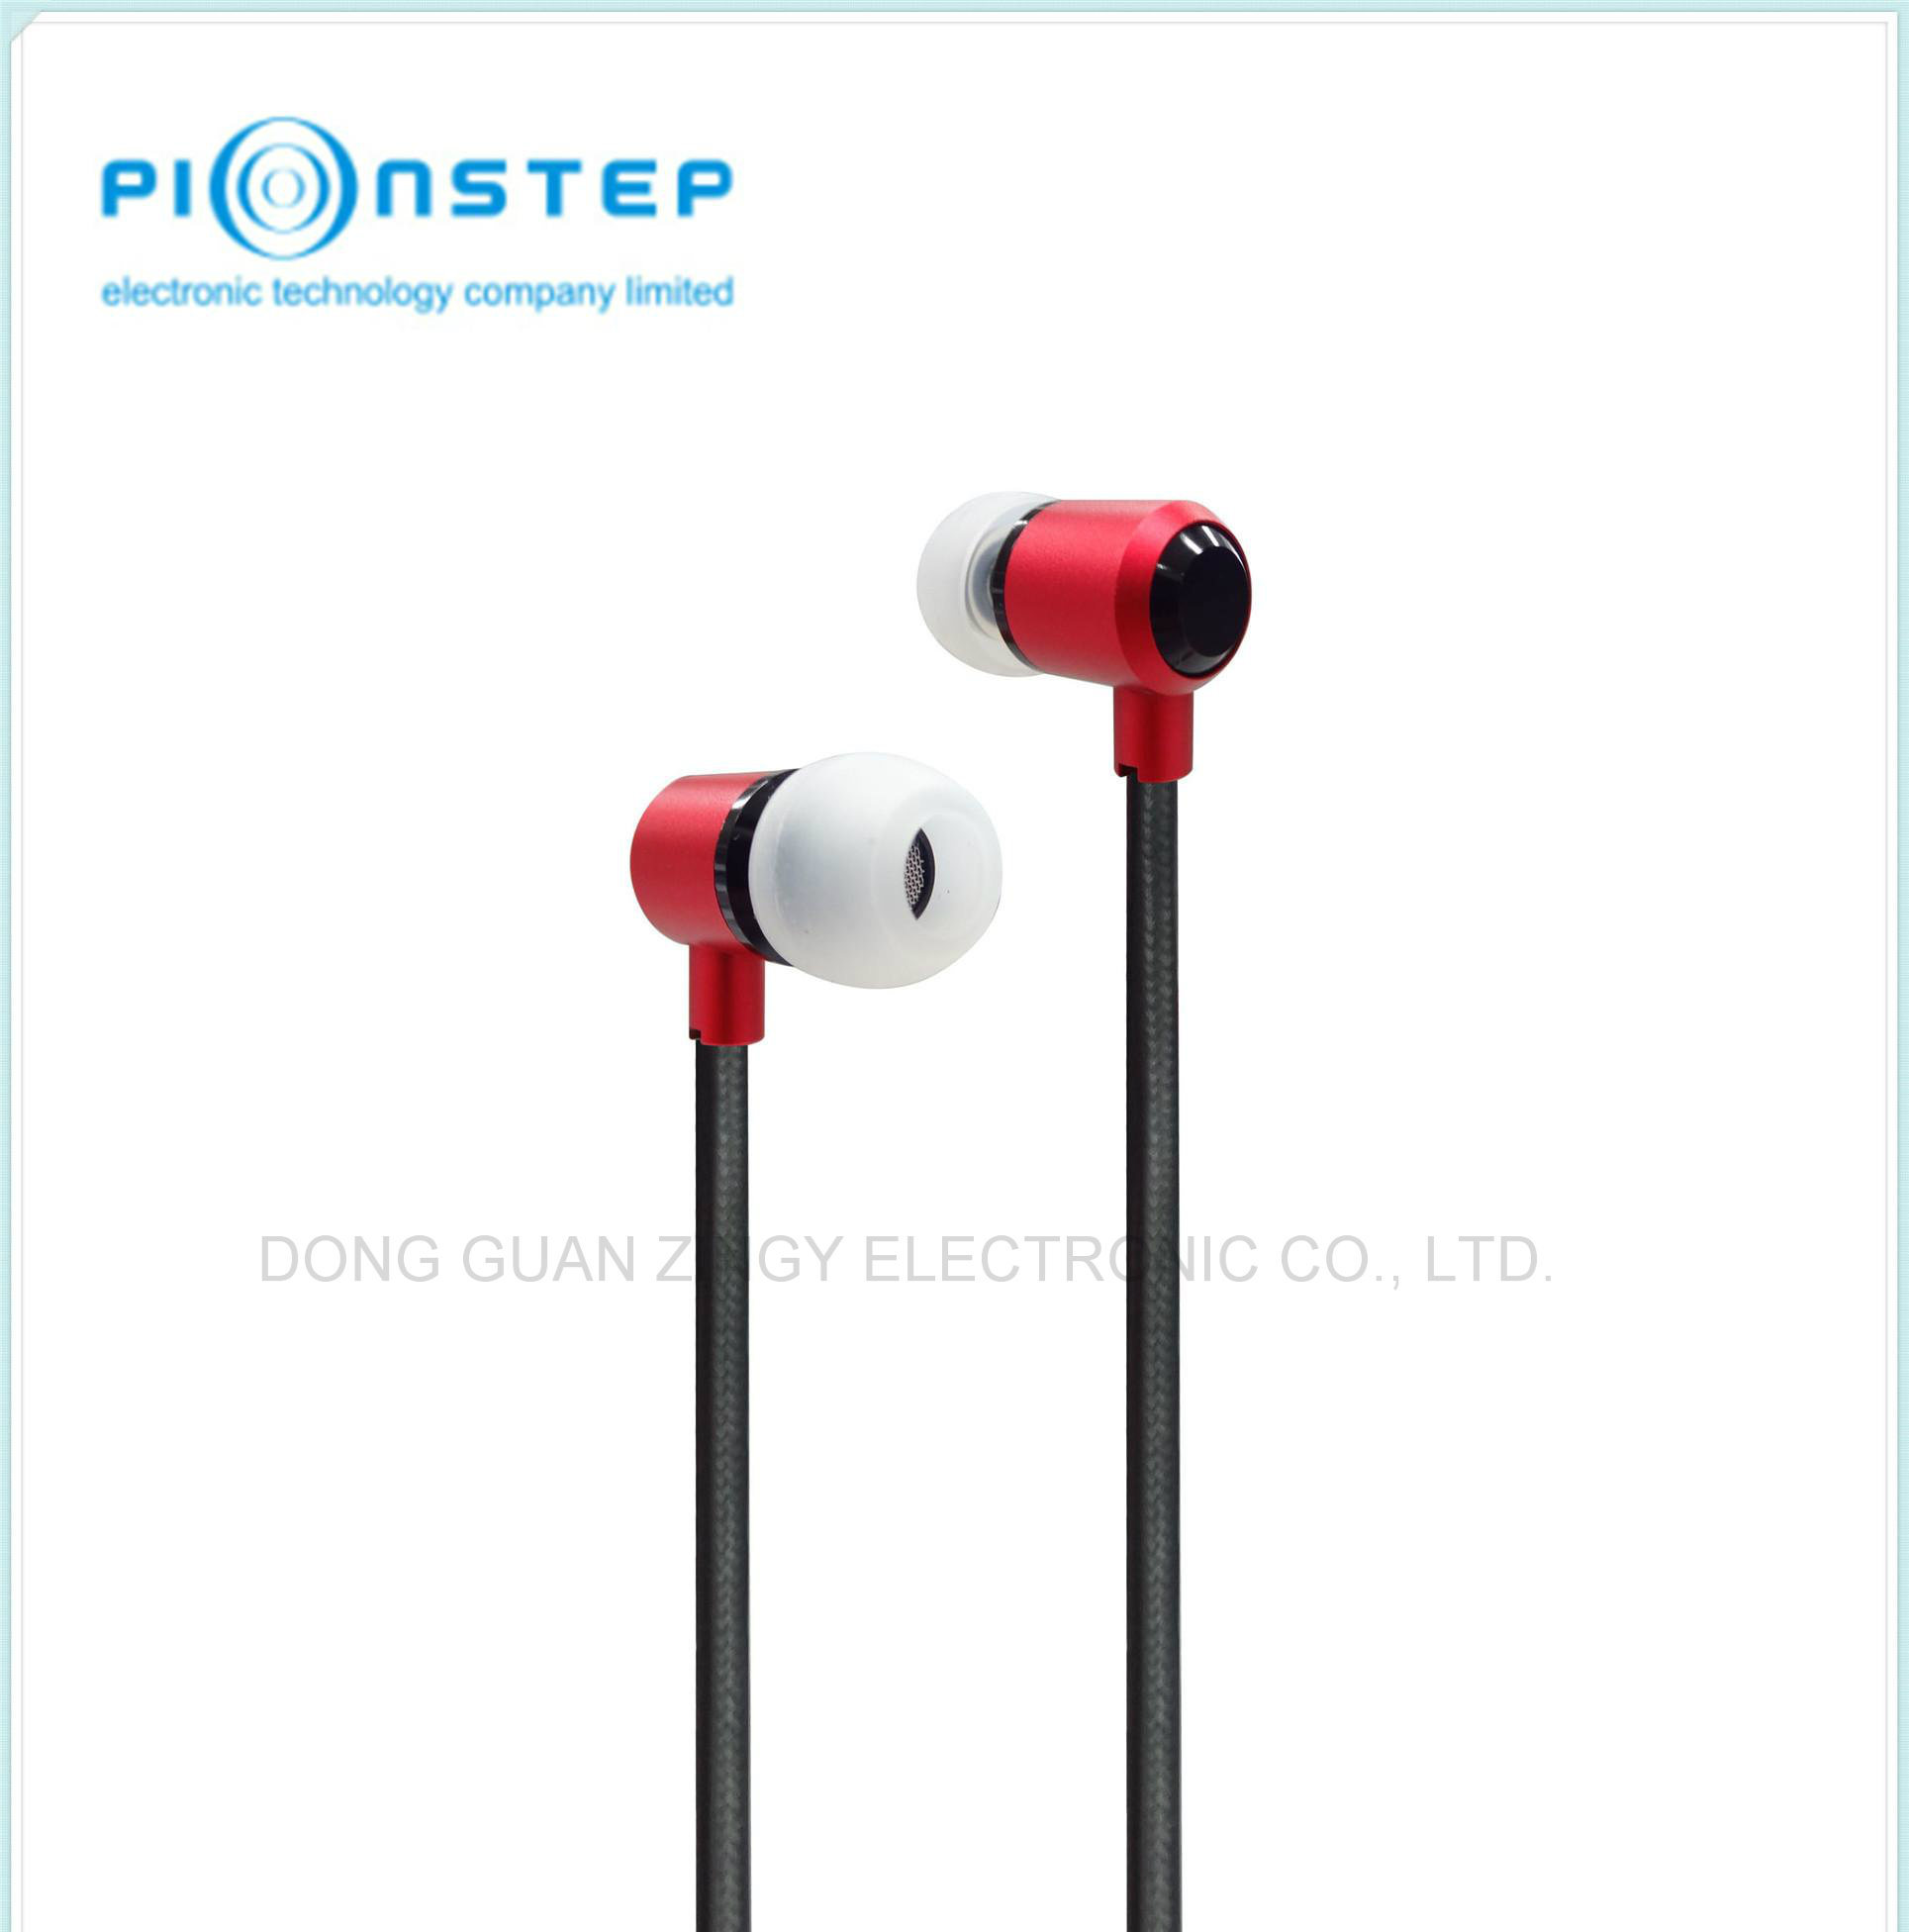 Top Quality Earbud Earphone with Innovation Style